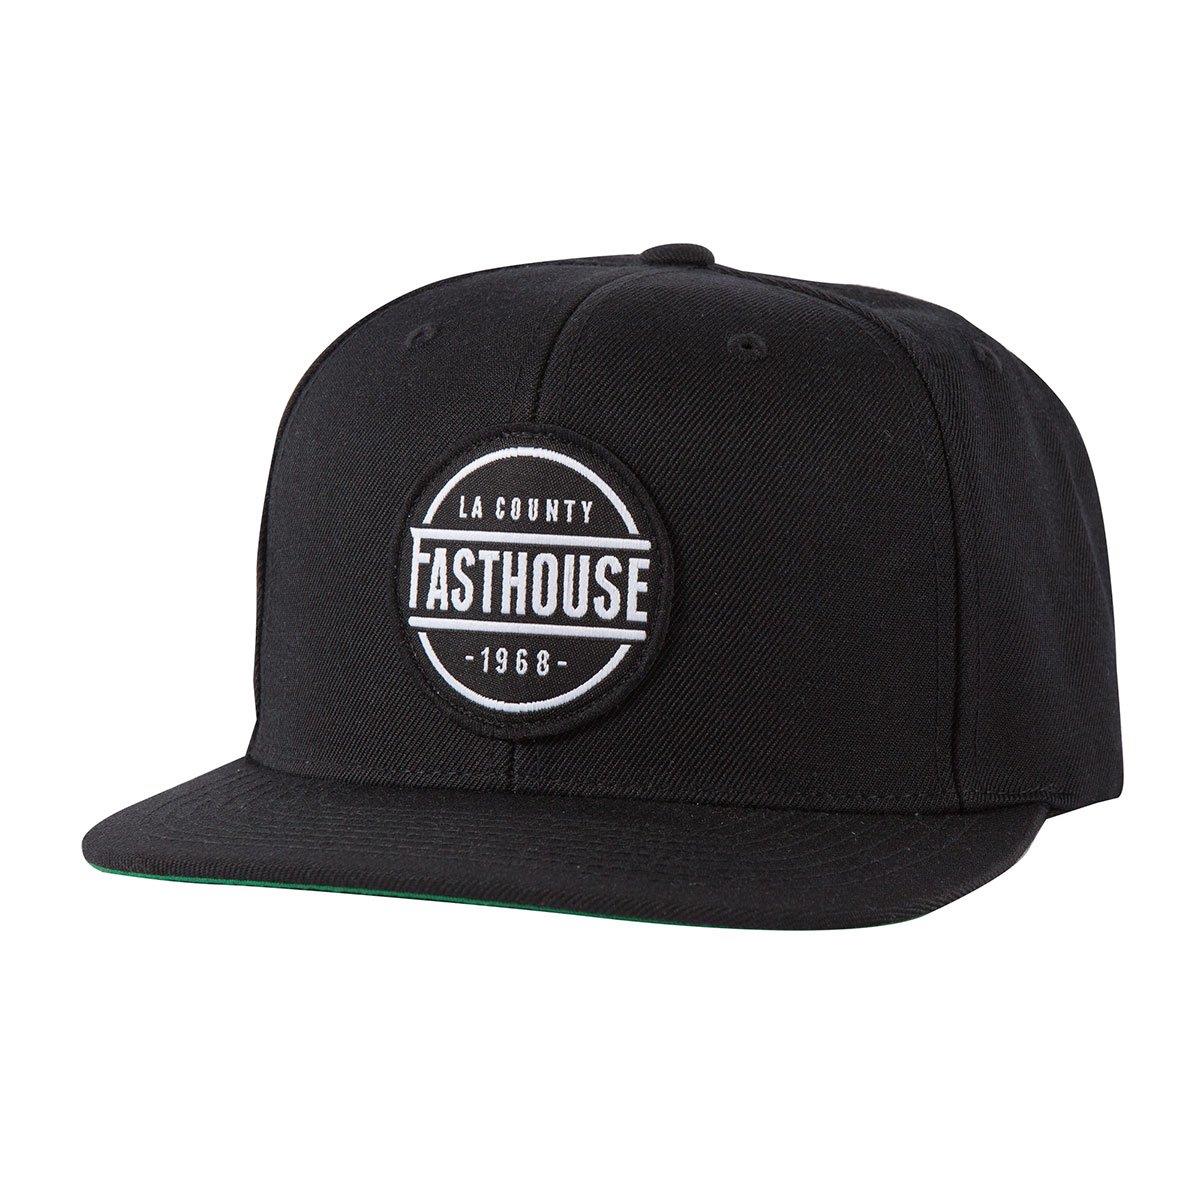 Fasthouse Cappellino Snap Back LA County Black